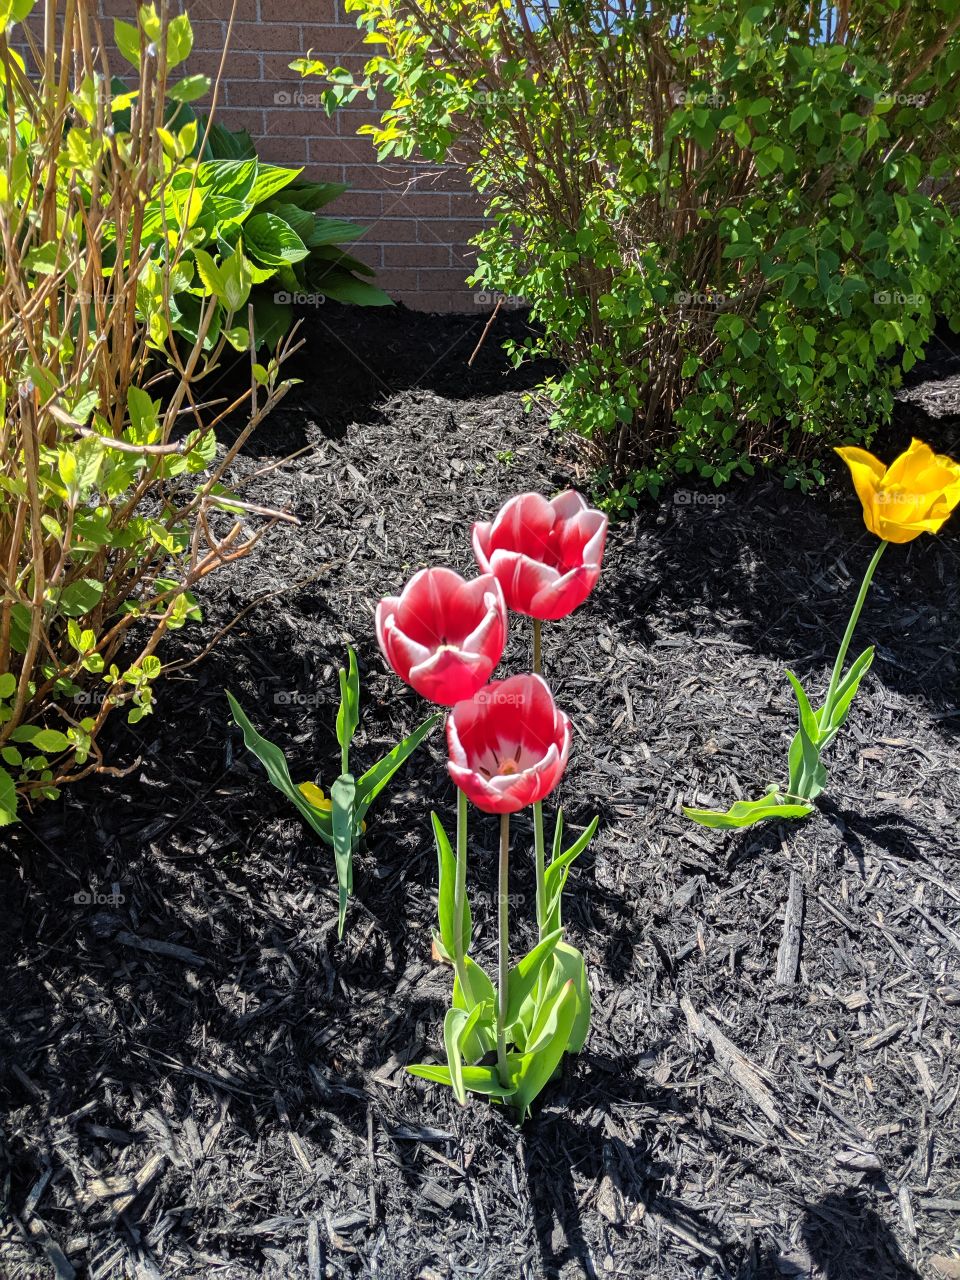 red and white flowers in flower bed, yellow flower visible to the right.